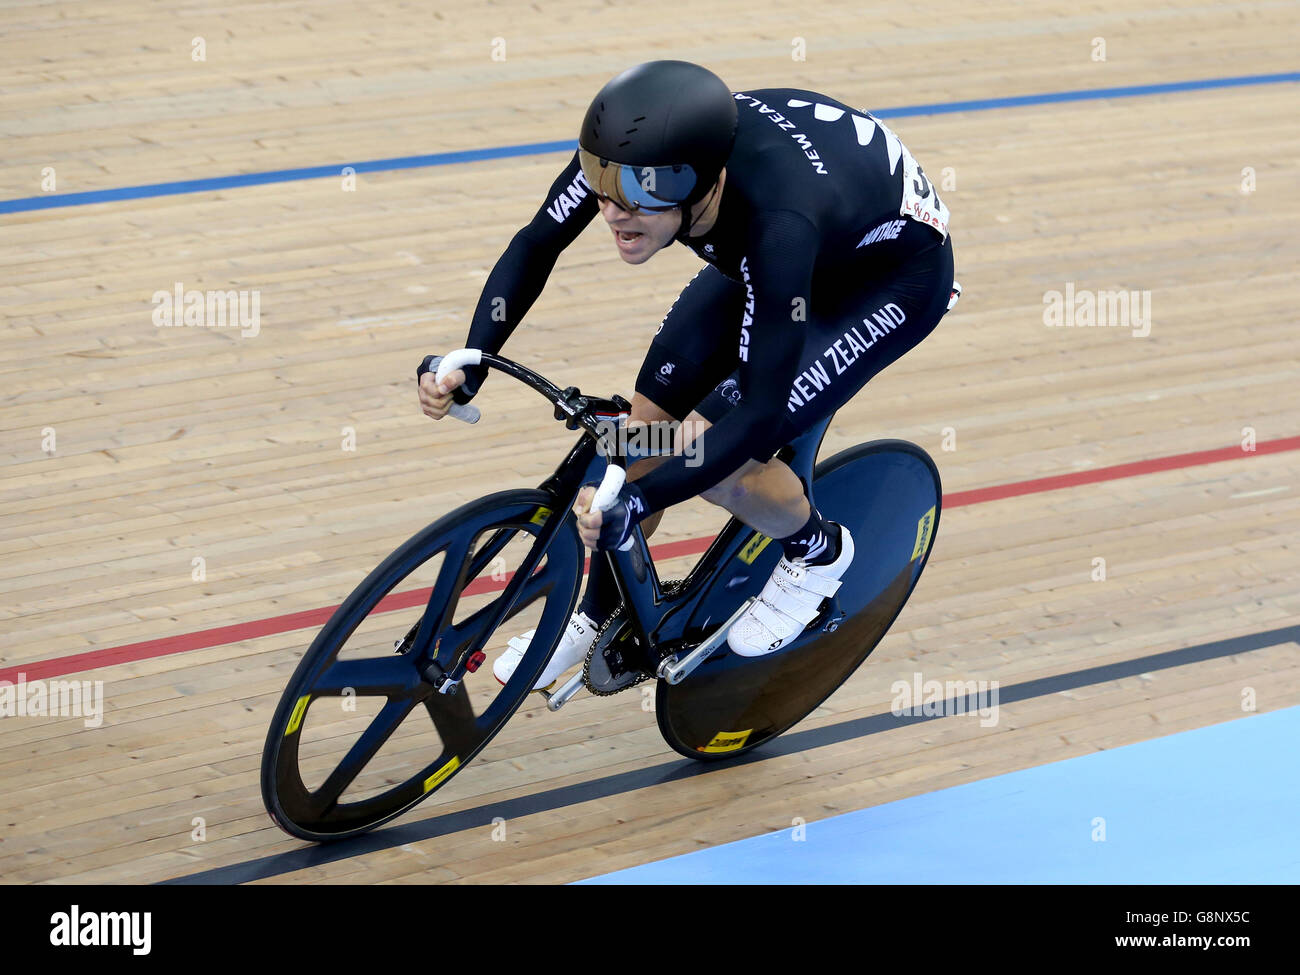 New Zealand's Aaron Gate competes in the Men's Omnium Scratch during day three of the UCI Track Cycling World Championships at Lee Valley VeloPark, London. PRESS ASSOCIATION Photo. Picture date: Friday March 4, 2016. See PA story CYCLING World. Photo credit should read: Tim Goode/PA Wire. Stock Photo